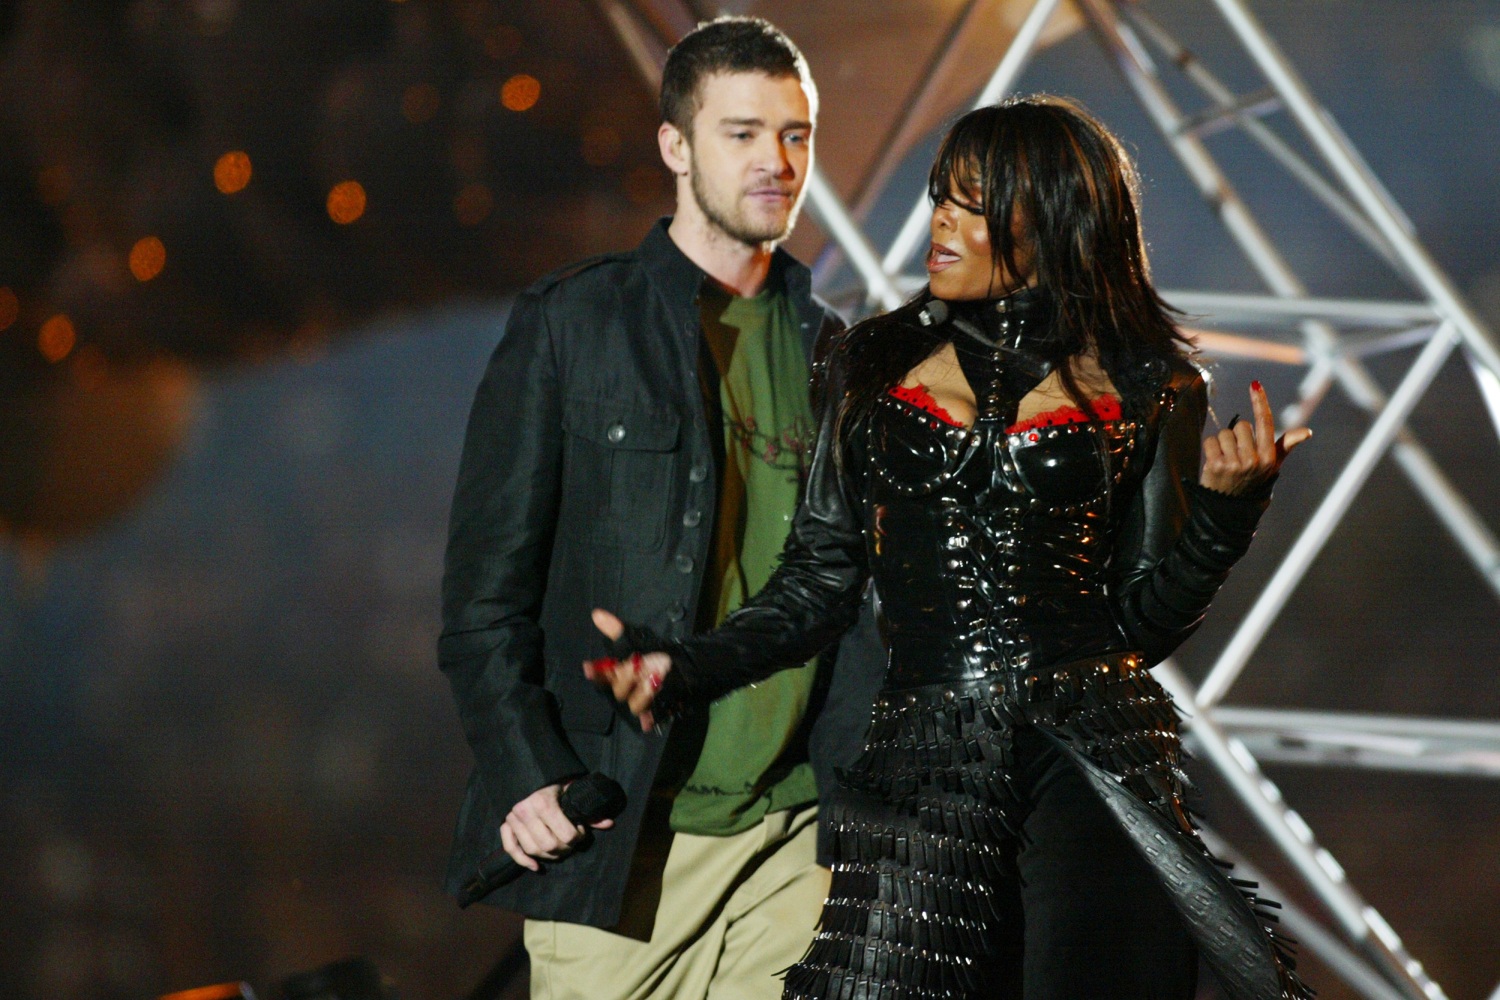 Janet Jackson says she and Justin Timberlake are 'good friends'